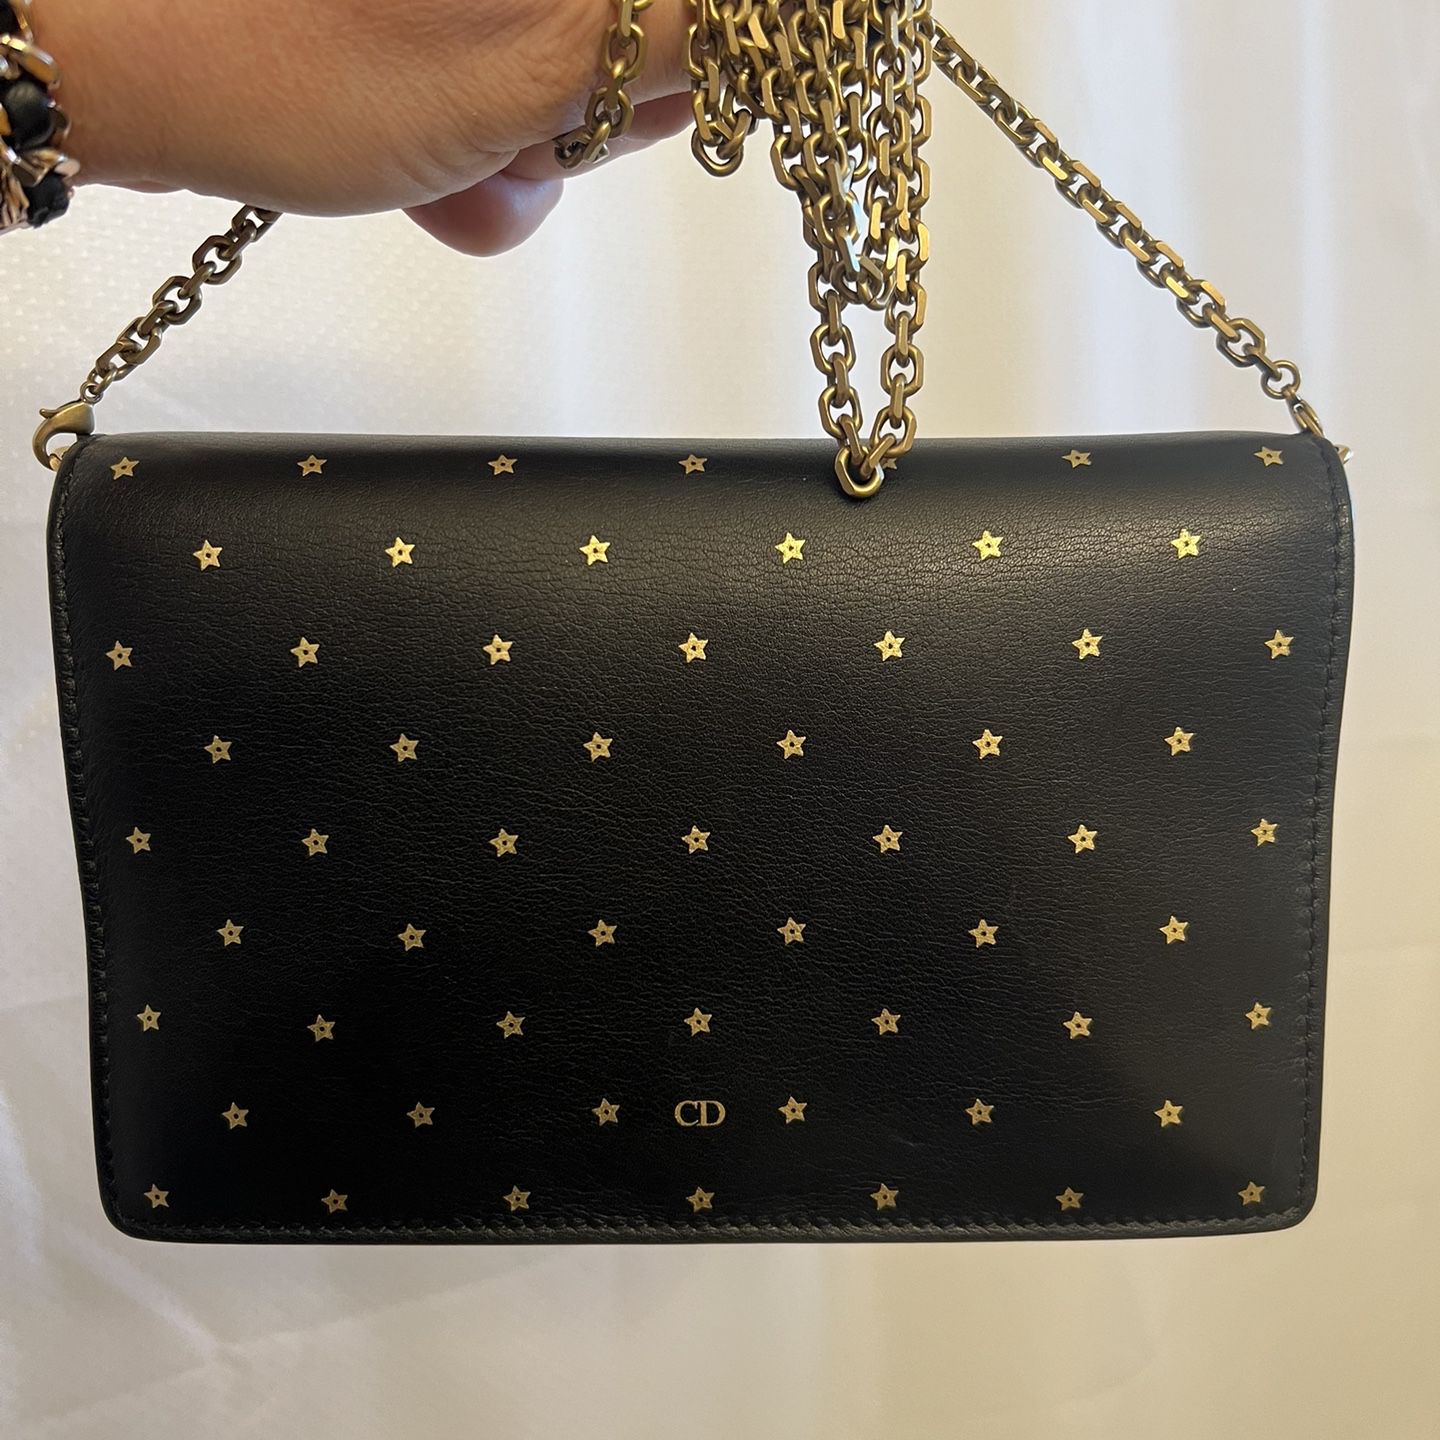 Authentic Dior Black And Gold Star Chain Bag